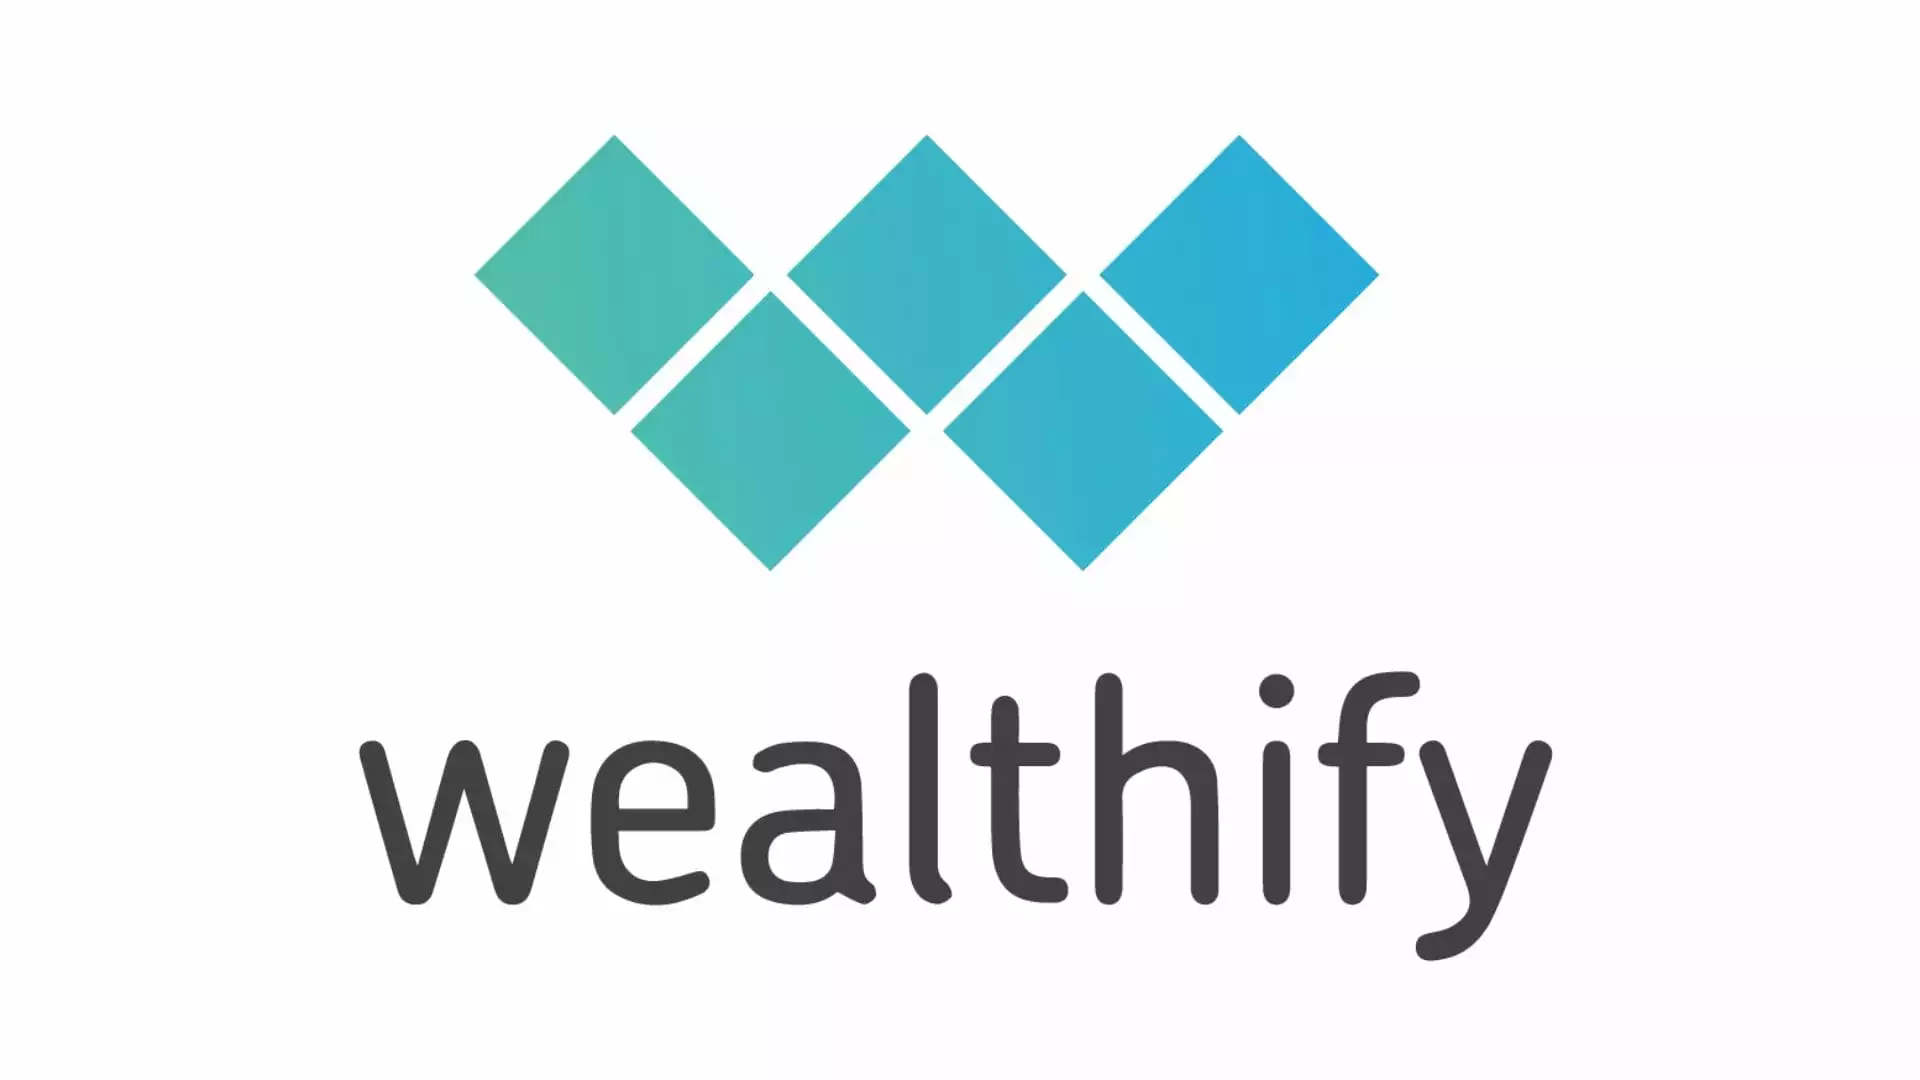 Wealthify - Pensions Made Simple